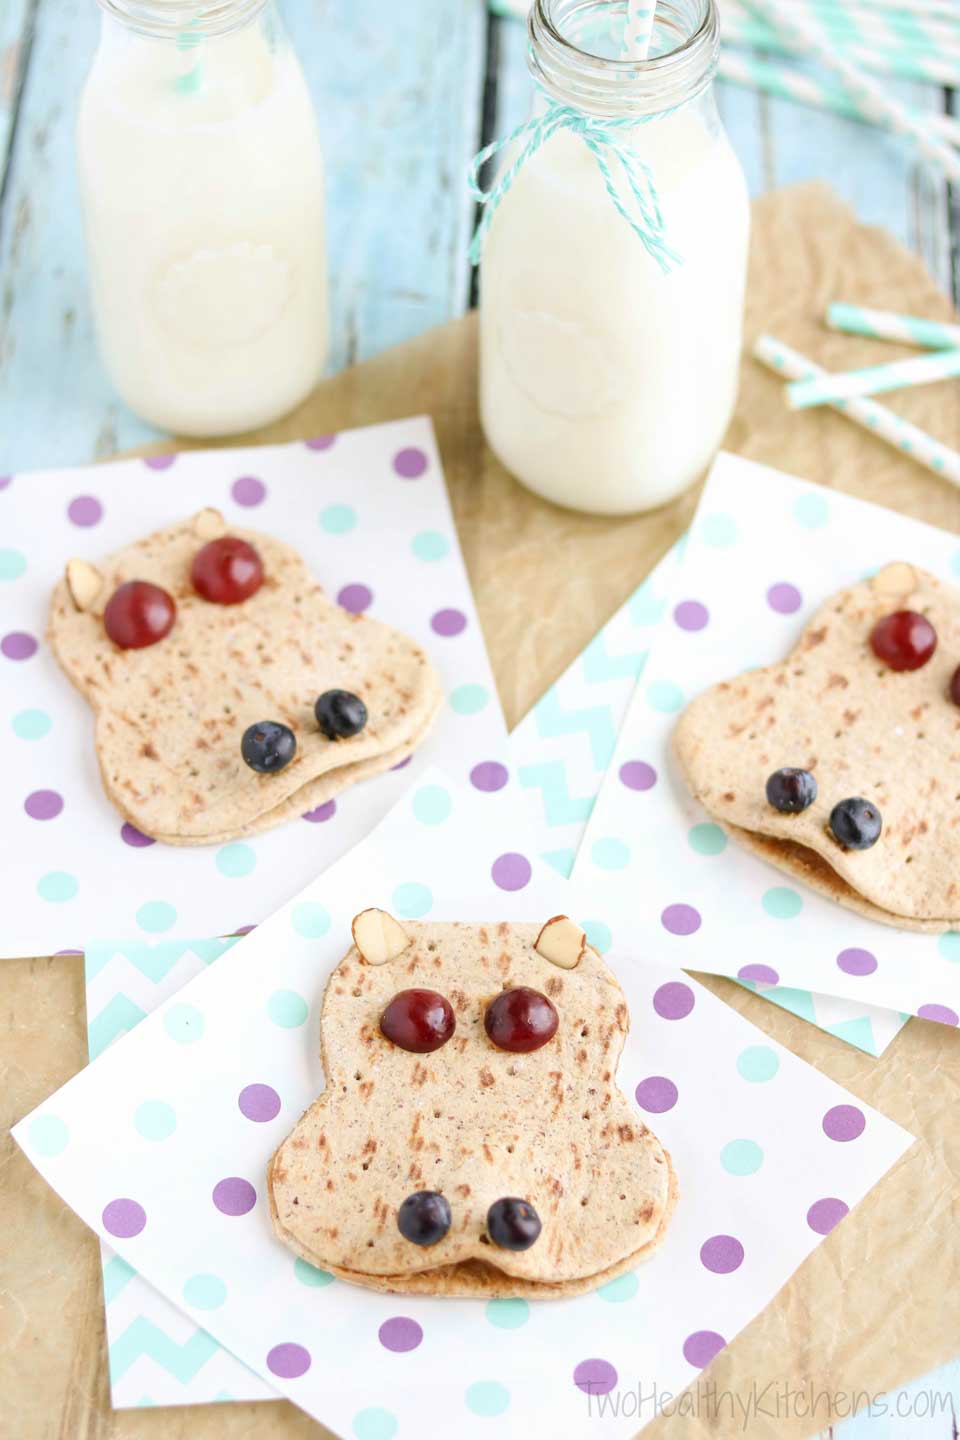 Kids will love this adorable sandwich recipe! Use it as a fun edible art project ... or as a special little lunch box surprise! Choose basic peanut butter and jelly, or one of our other creative filling ideas (even lots of nut-free options for school lunches)! AD | www.TwoHealthyKitchens.com